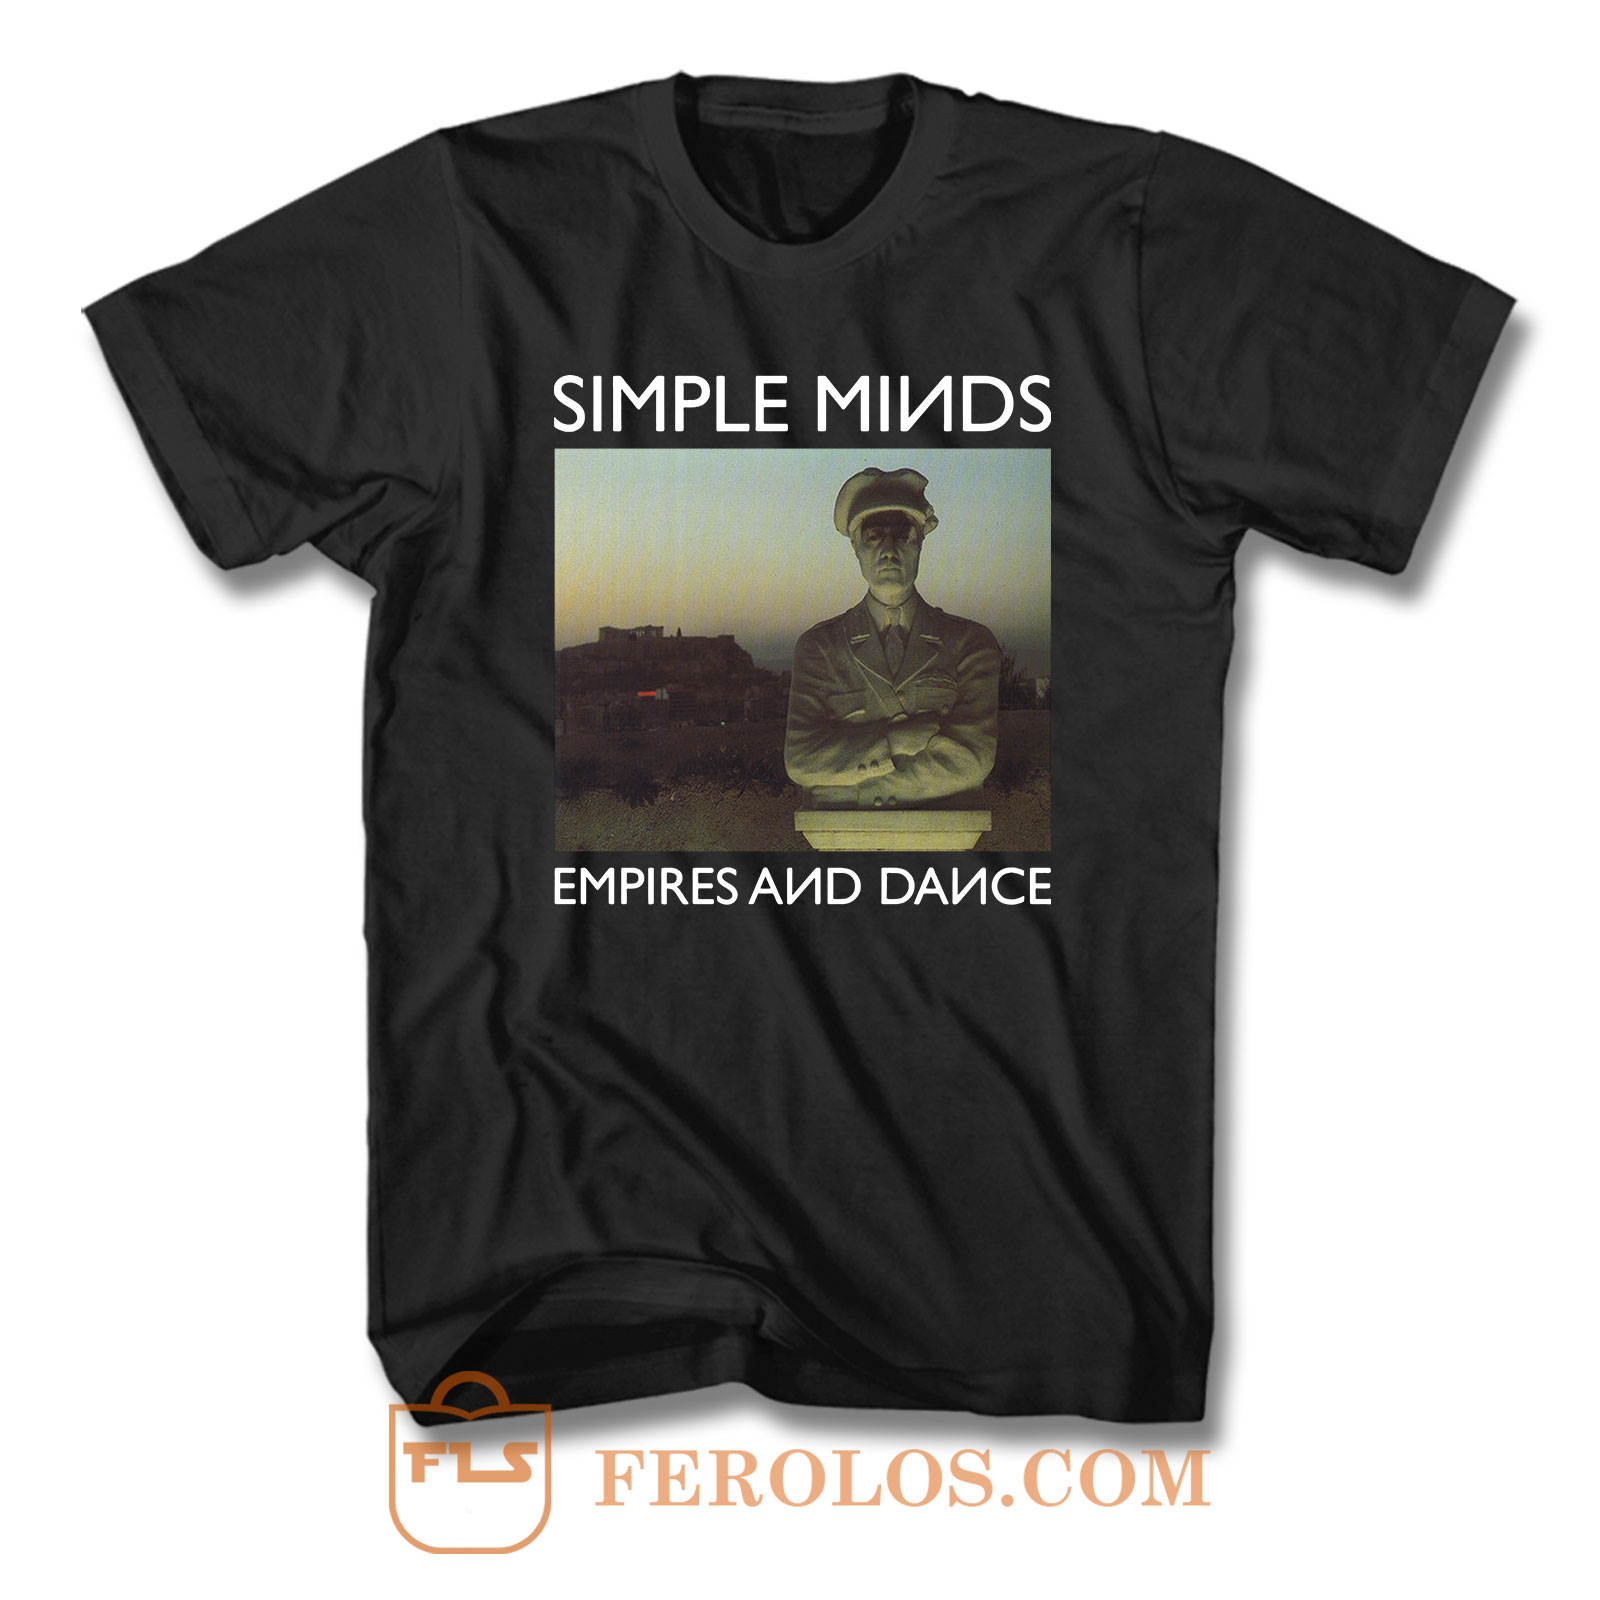 Empires and Dance T-Shirt Simple Minds